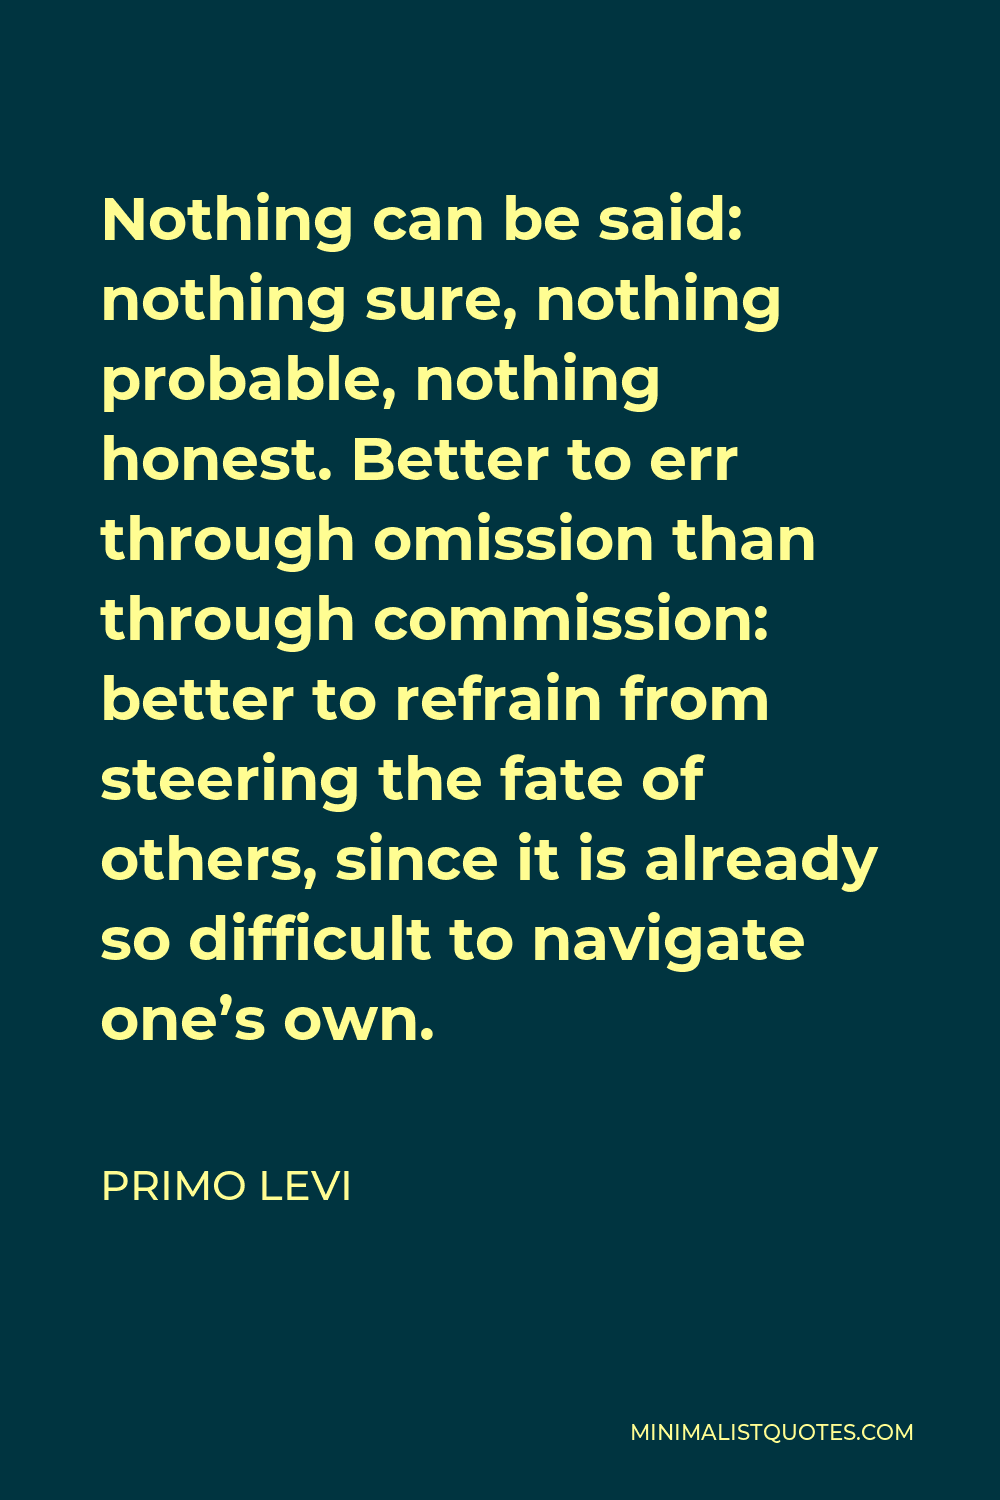 Primo Levi Quote - Nothing can be said: nothing sure, nothing probable, nothing honest. Better to err through omission than through commission: better to refrain from steering the fate of others, since it is already so difficult to navigate one’s own.